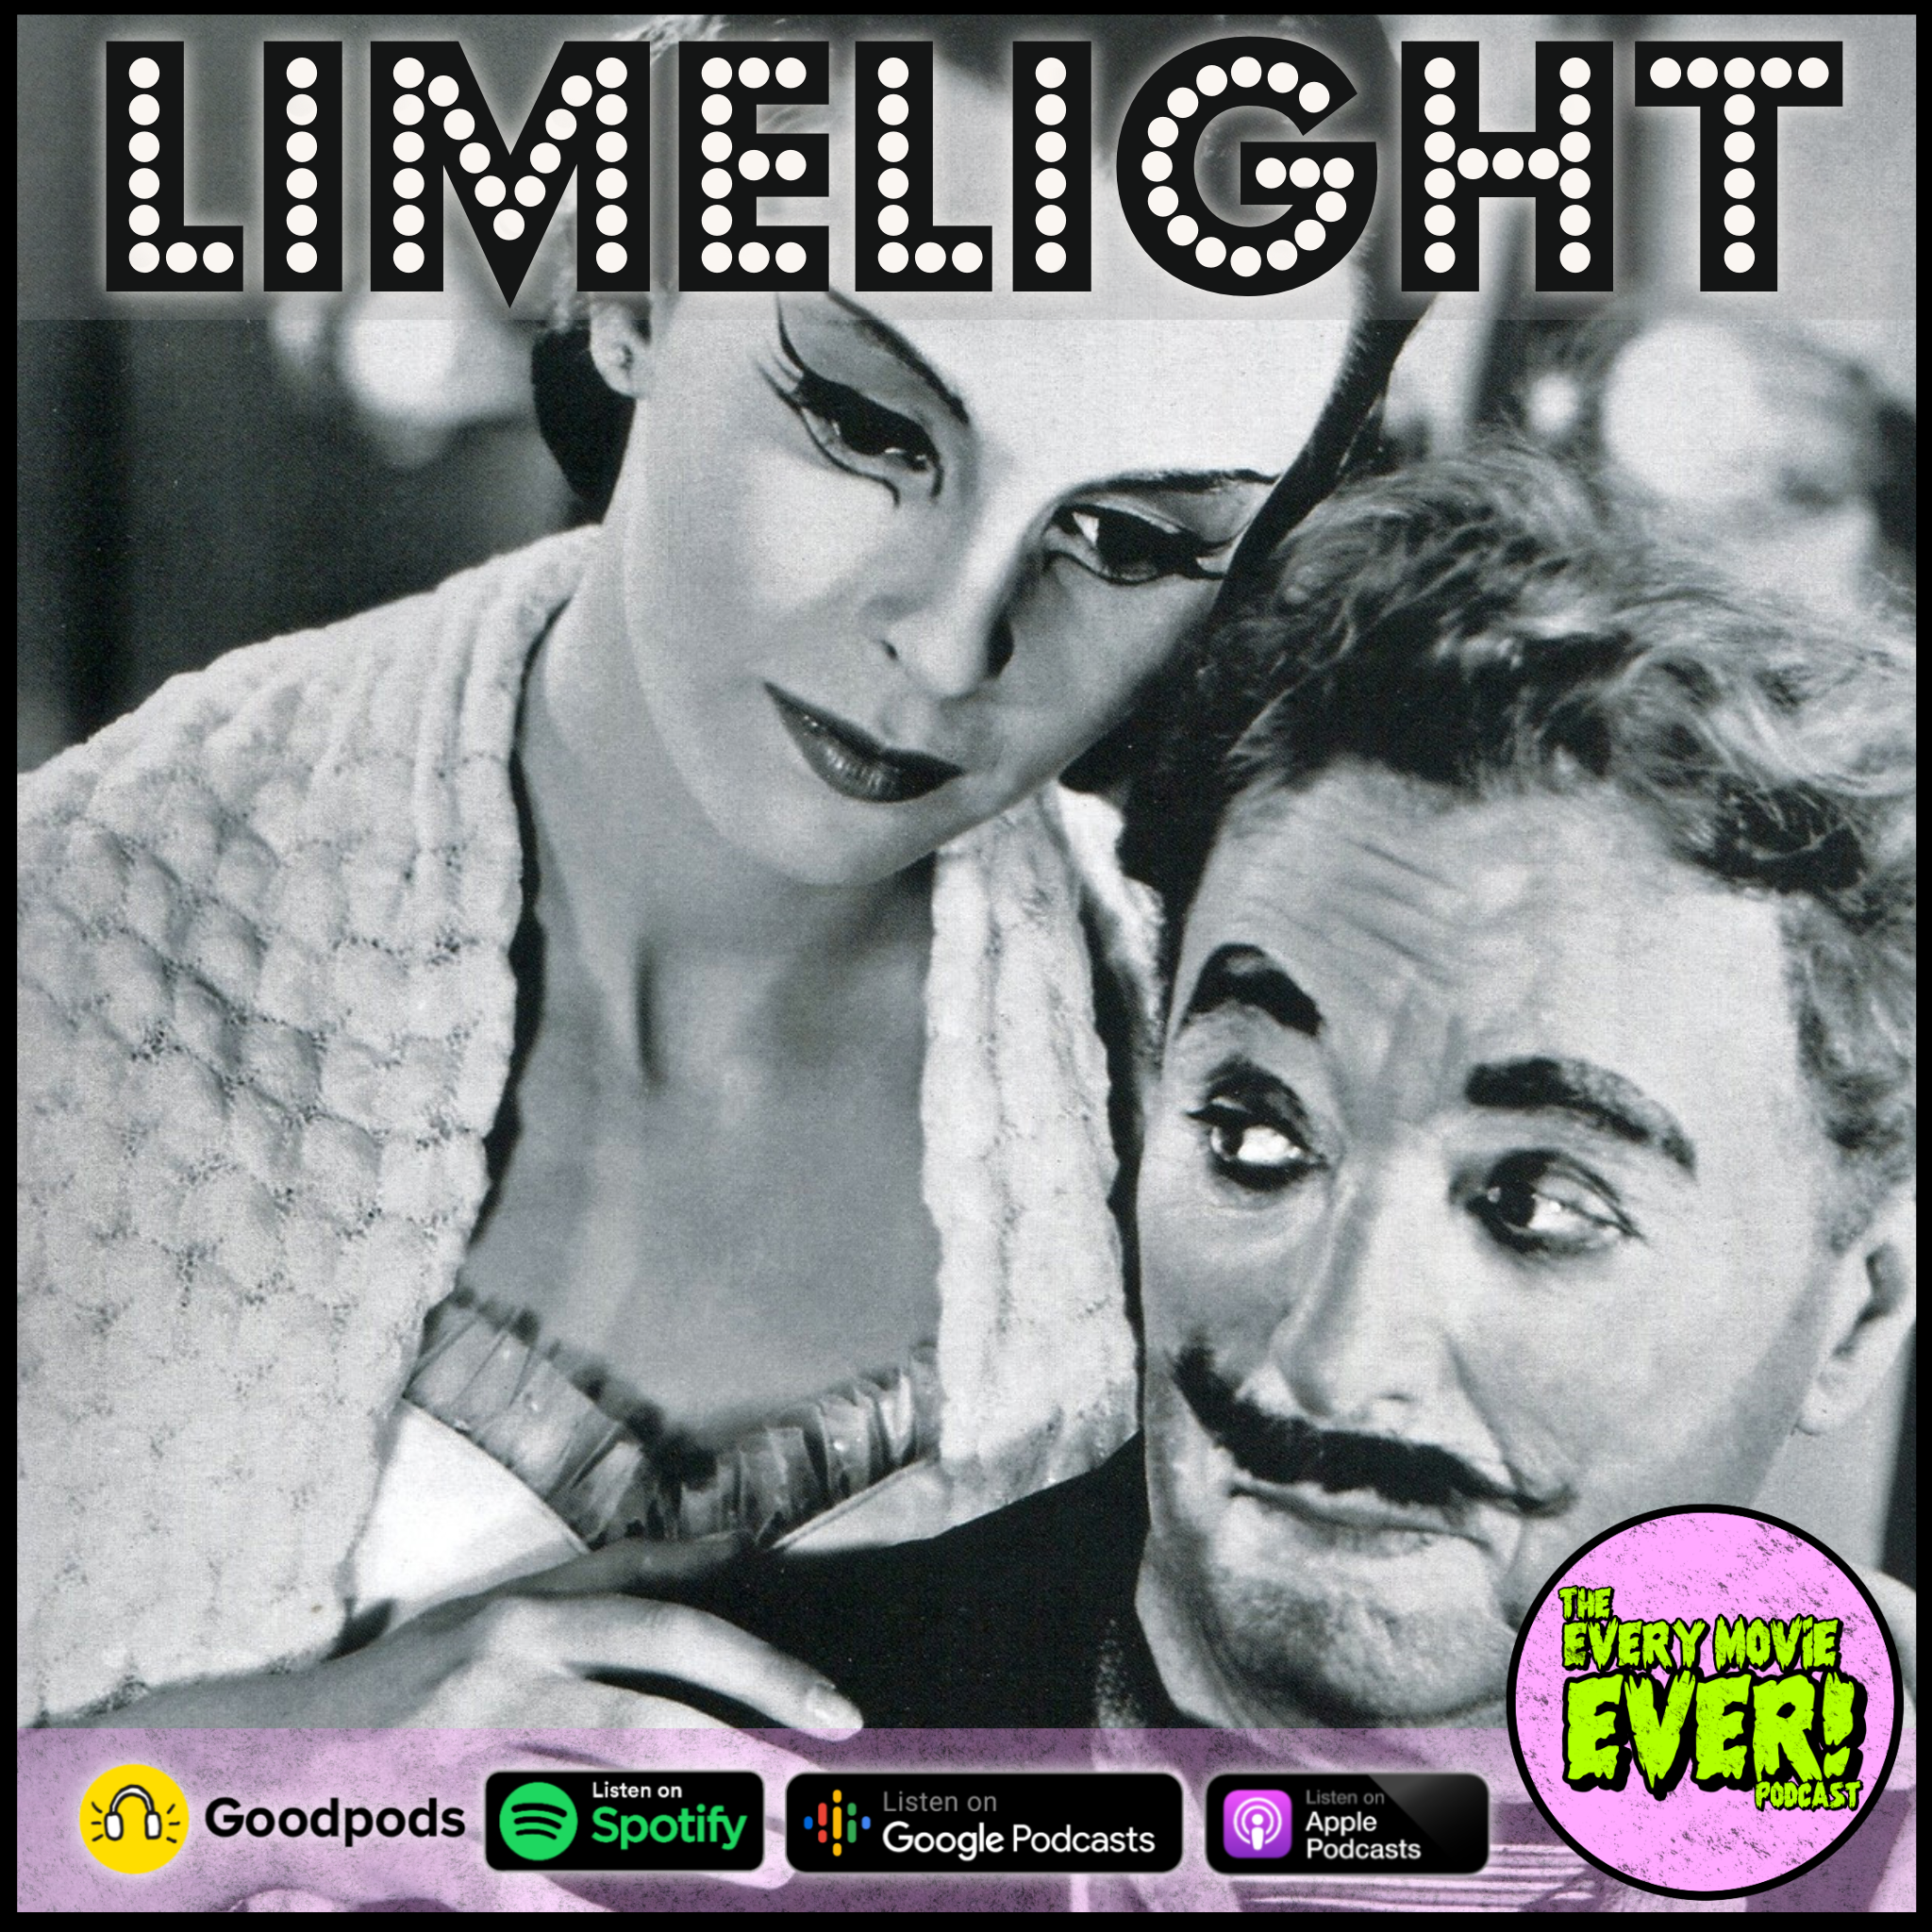 Limelight (1952): Why Was Chaplin's Most Personal Film Also His Last In Hollywood?